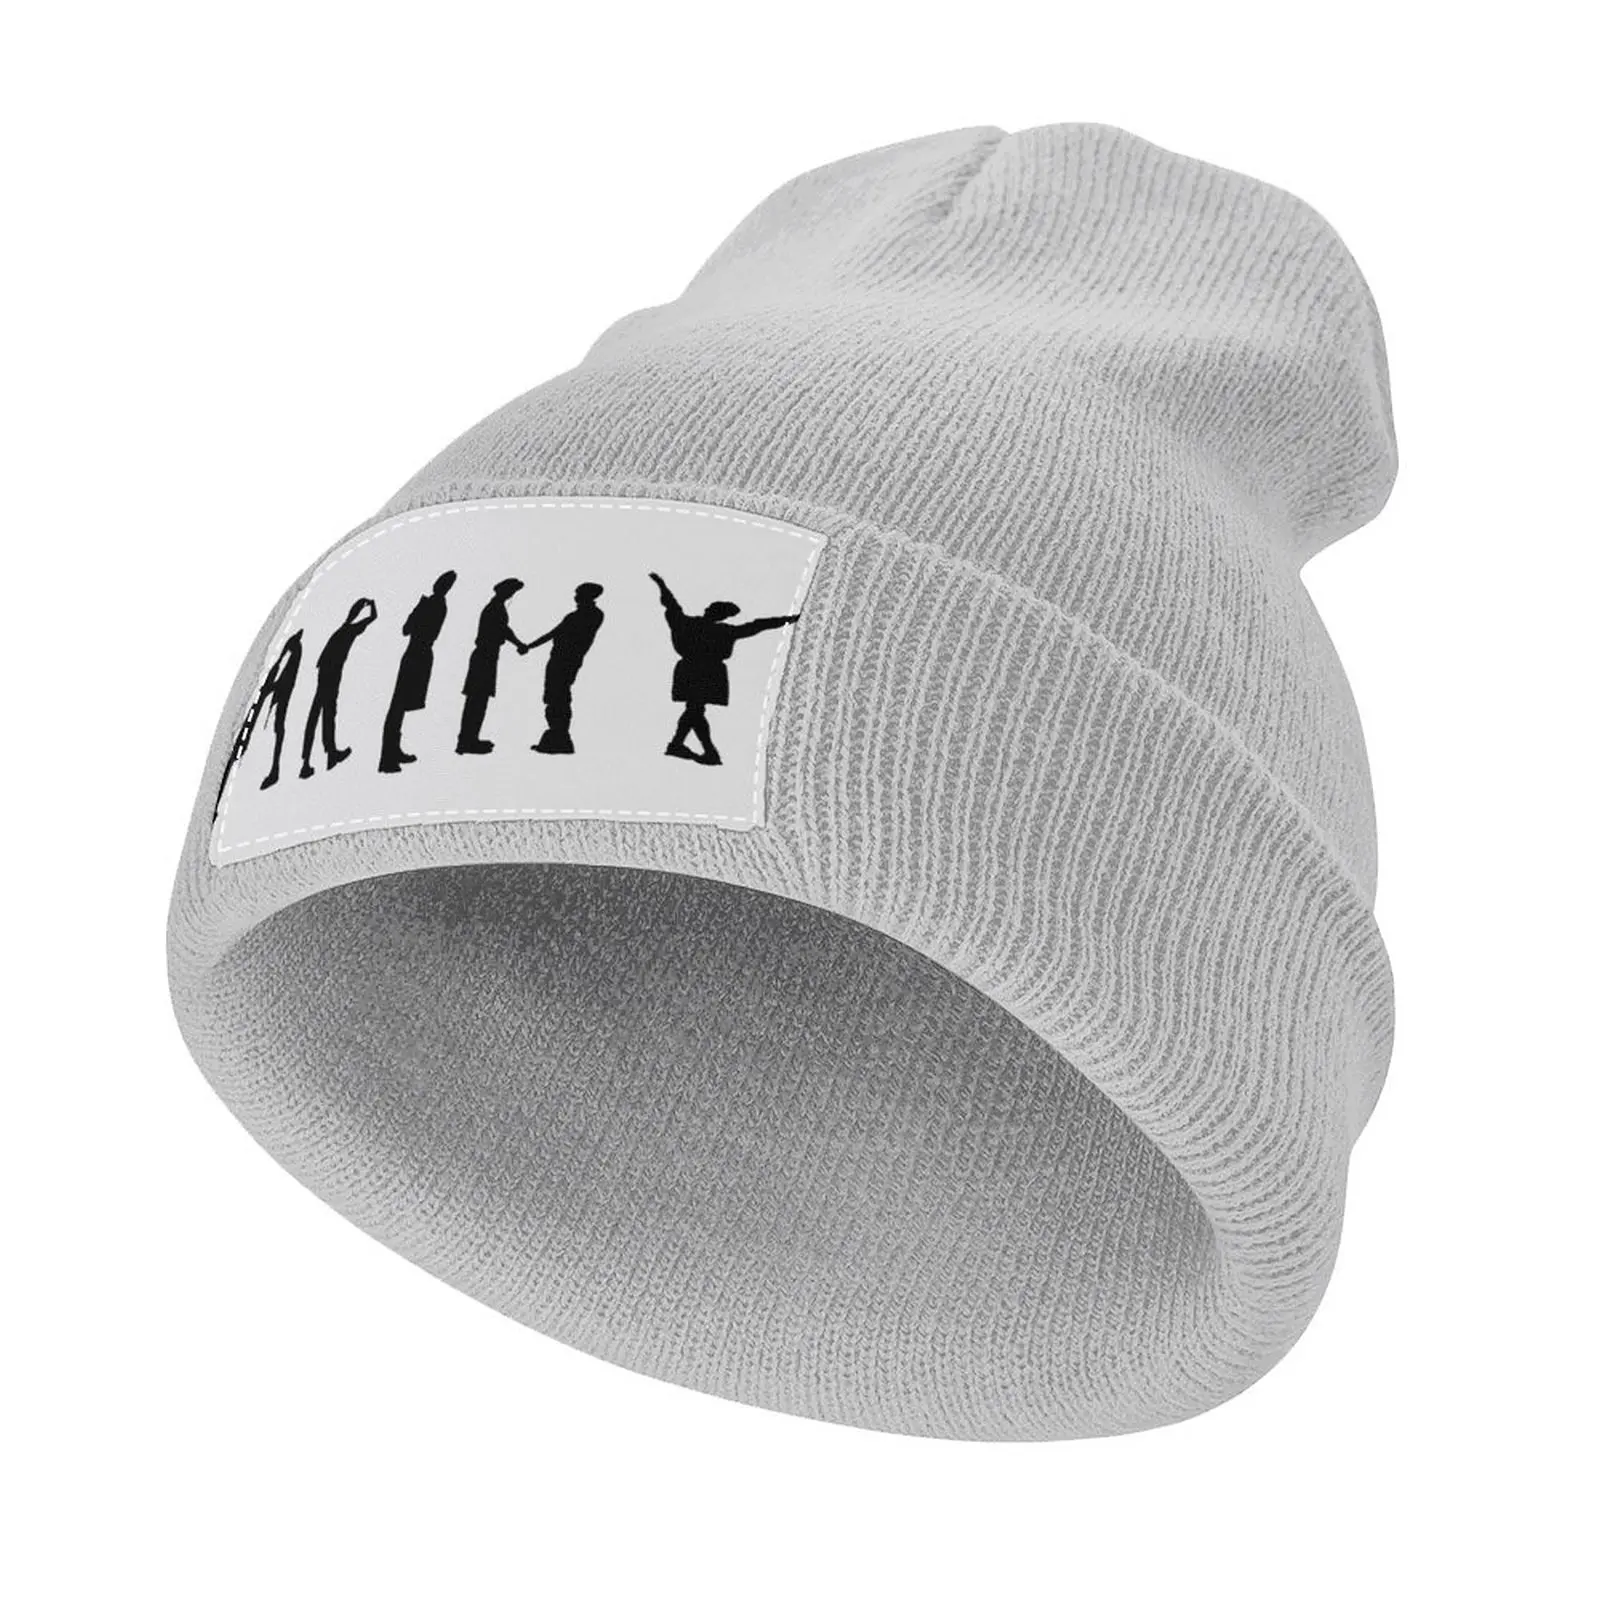 

Butter ARMY silhouette, Butter illustration stickers Knitted Hat Rugby Fluffy Hat Dropshipping Boy Child Hat Women's